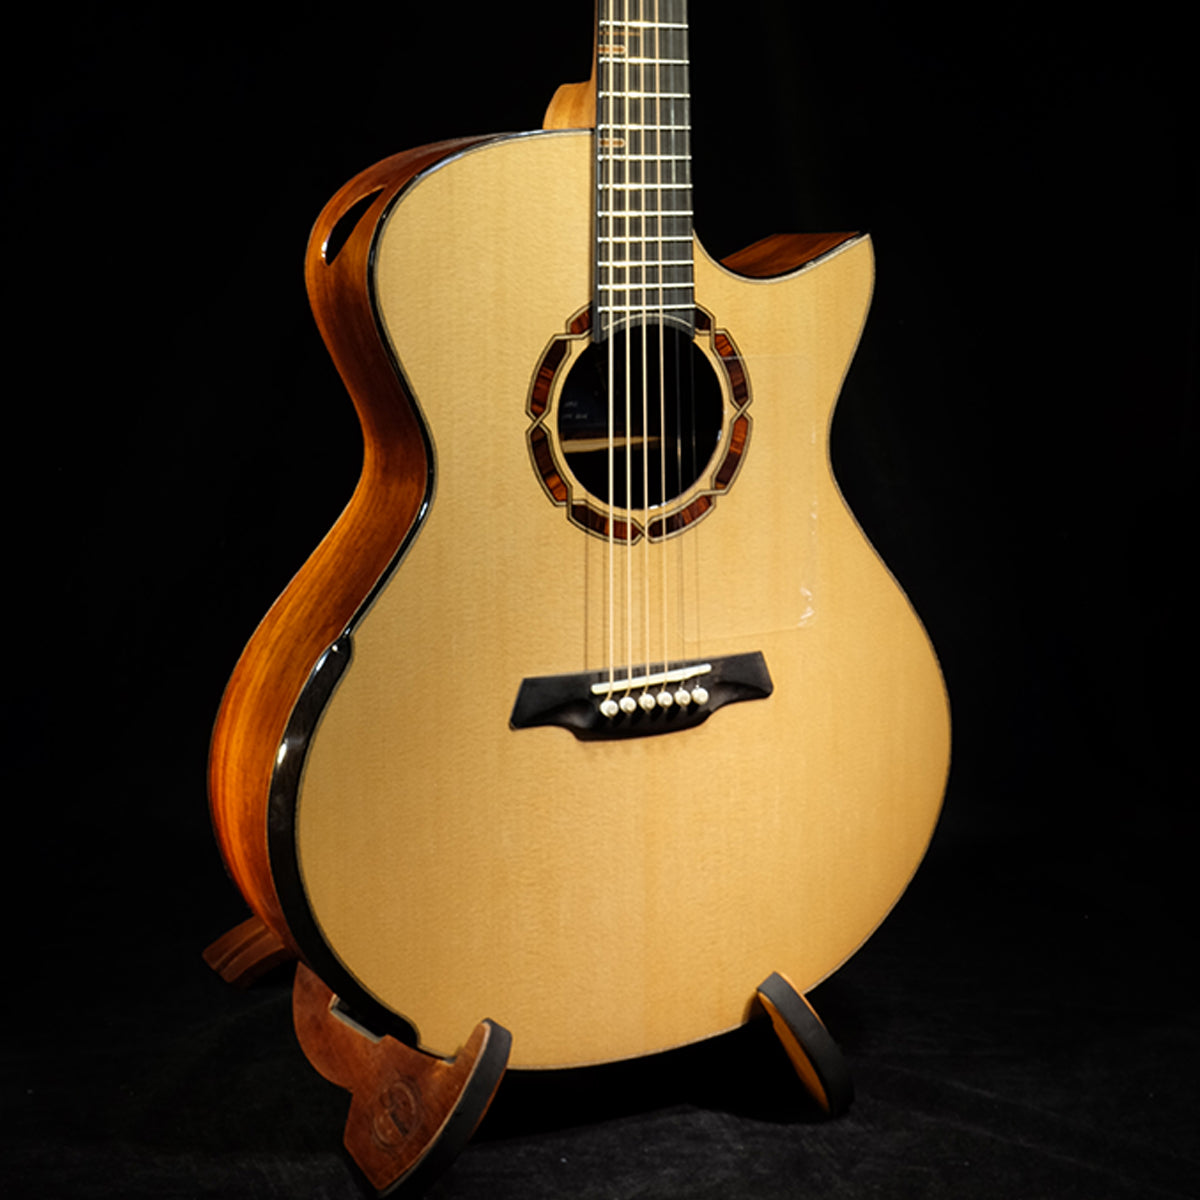 Blue Label MJ Sitka Spruce with Mexican Cocobolo | #9